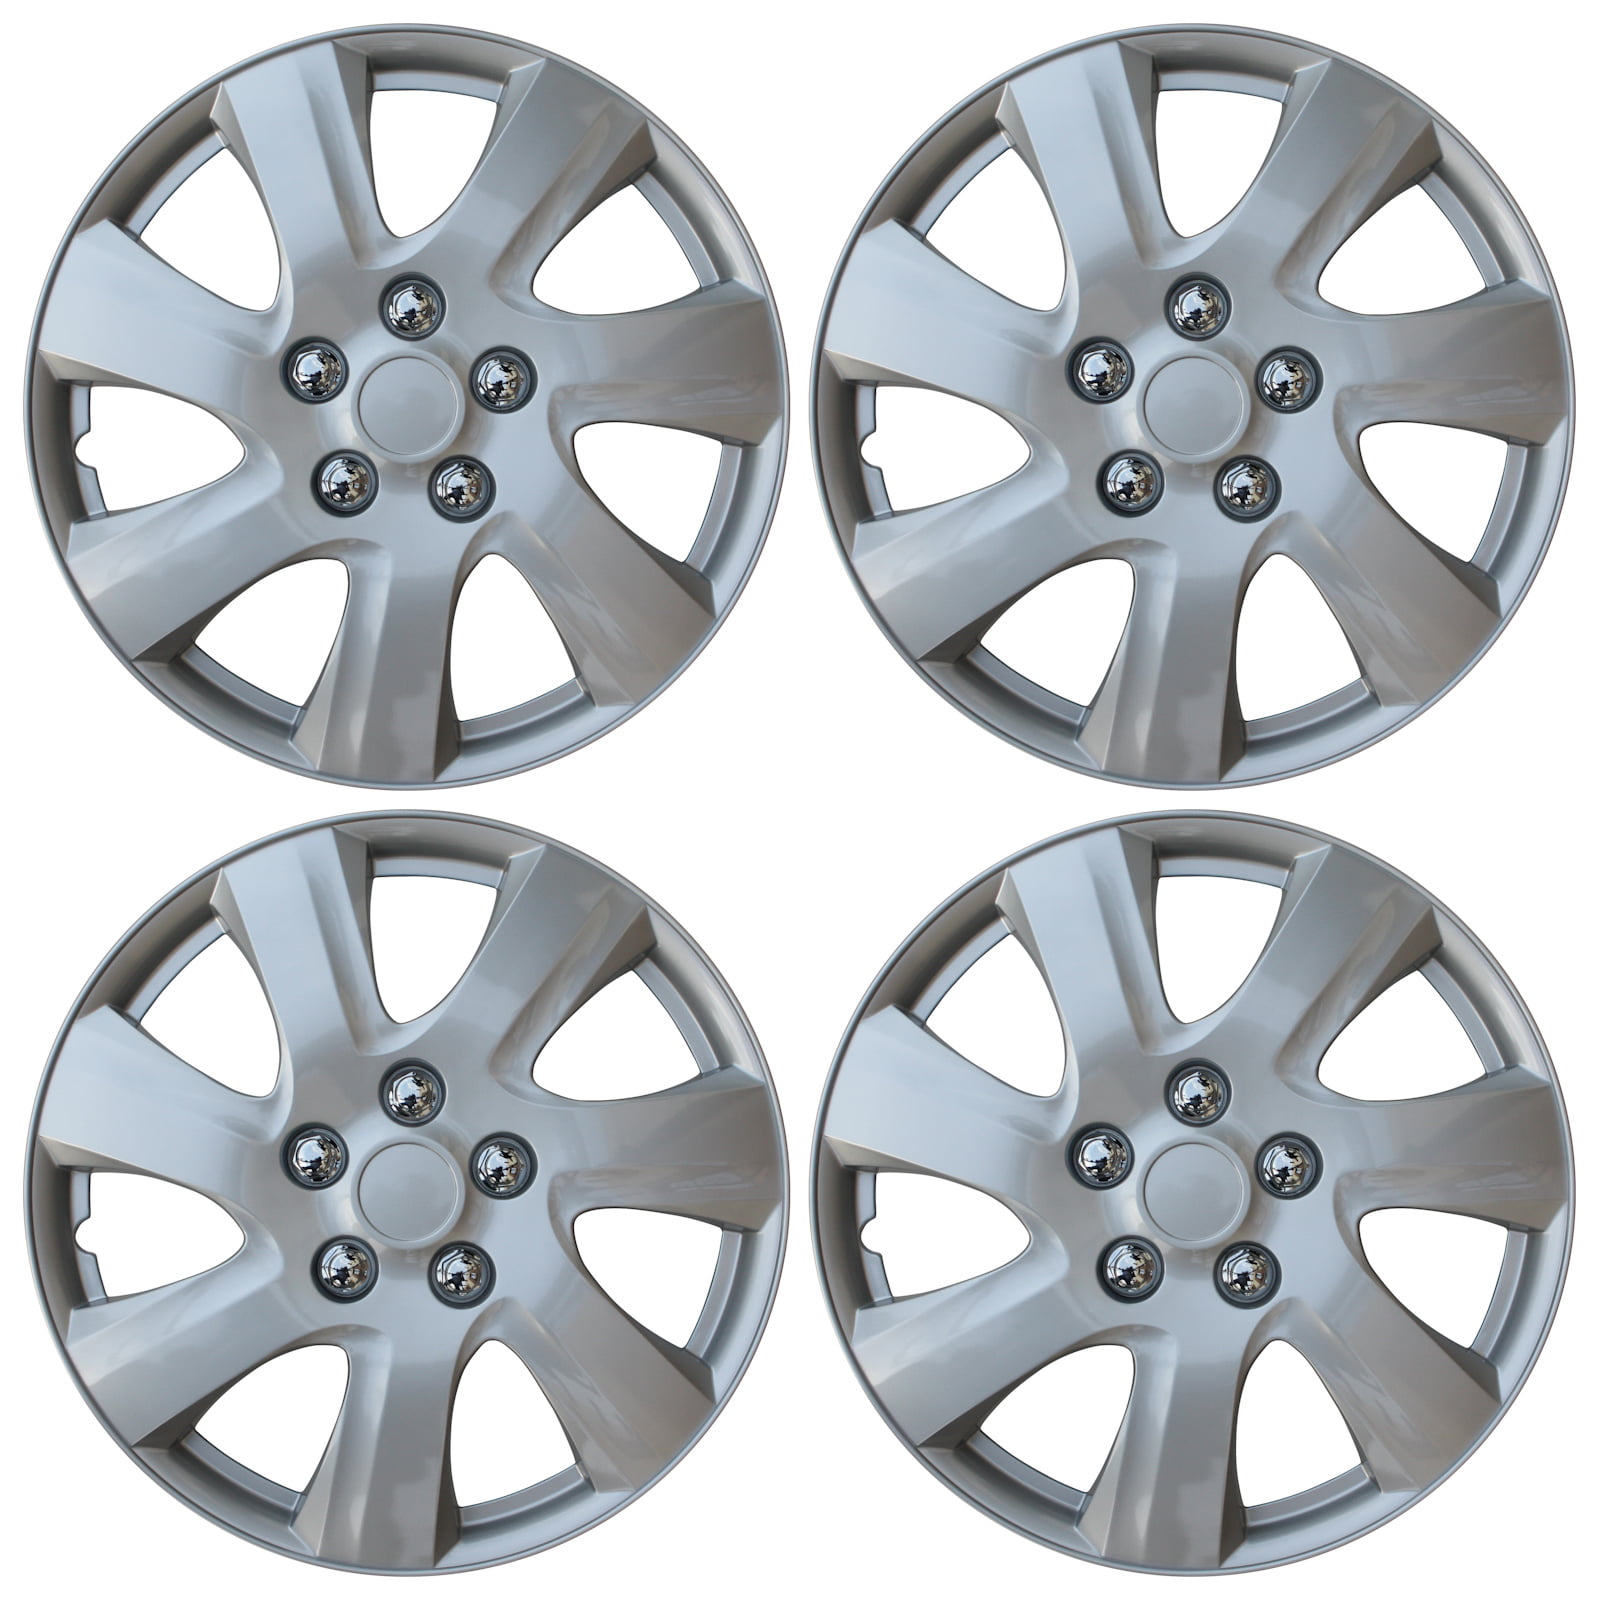 Details about  / 4 NEW OEM SILVER 15/" HUB CAPS FITS SATURN SUV CAR CENTER WHEEL COVERS SET